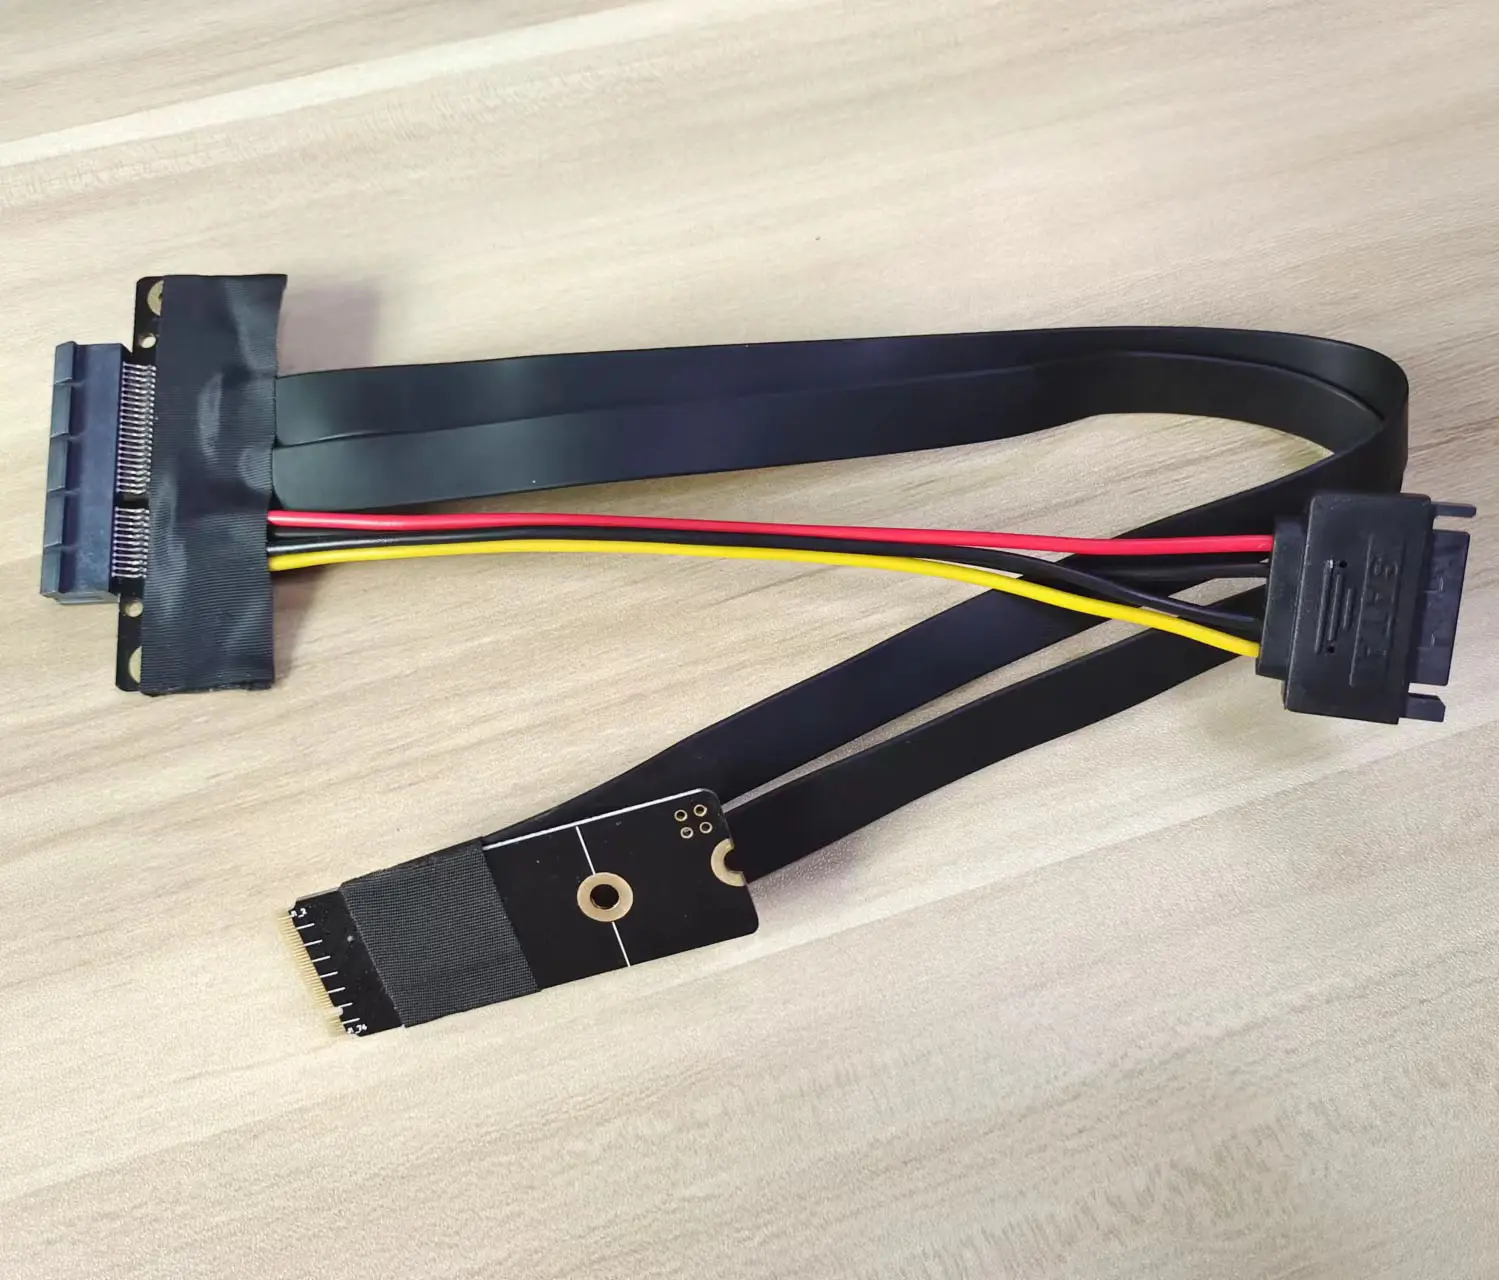 PCIe 3.0 x4 Extension Cable With 4P Sata Power Pcie 4x To M.2 M Key NVMe NGFF 2280 Riser Card Gen3 Extender Line 32G/Bps